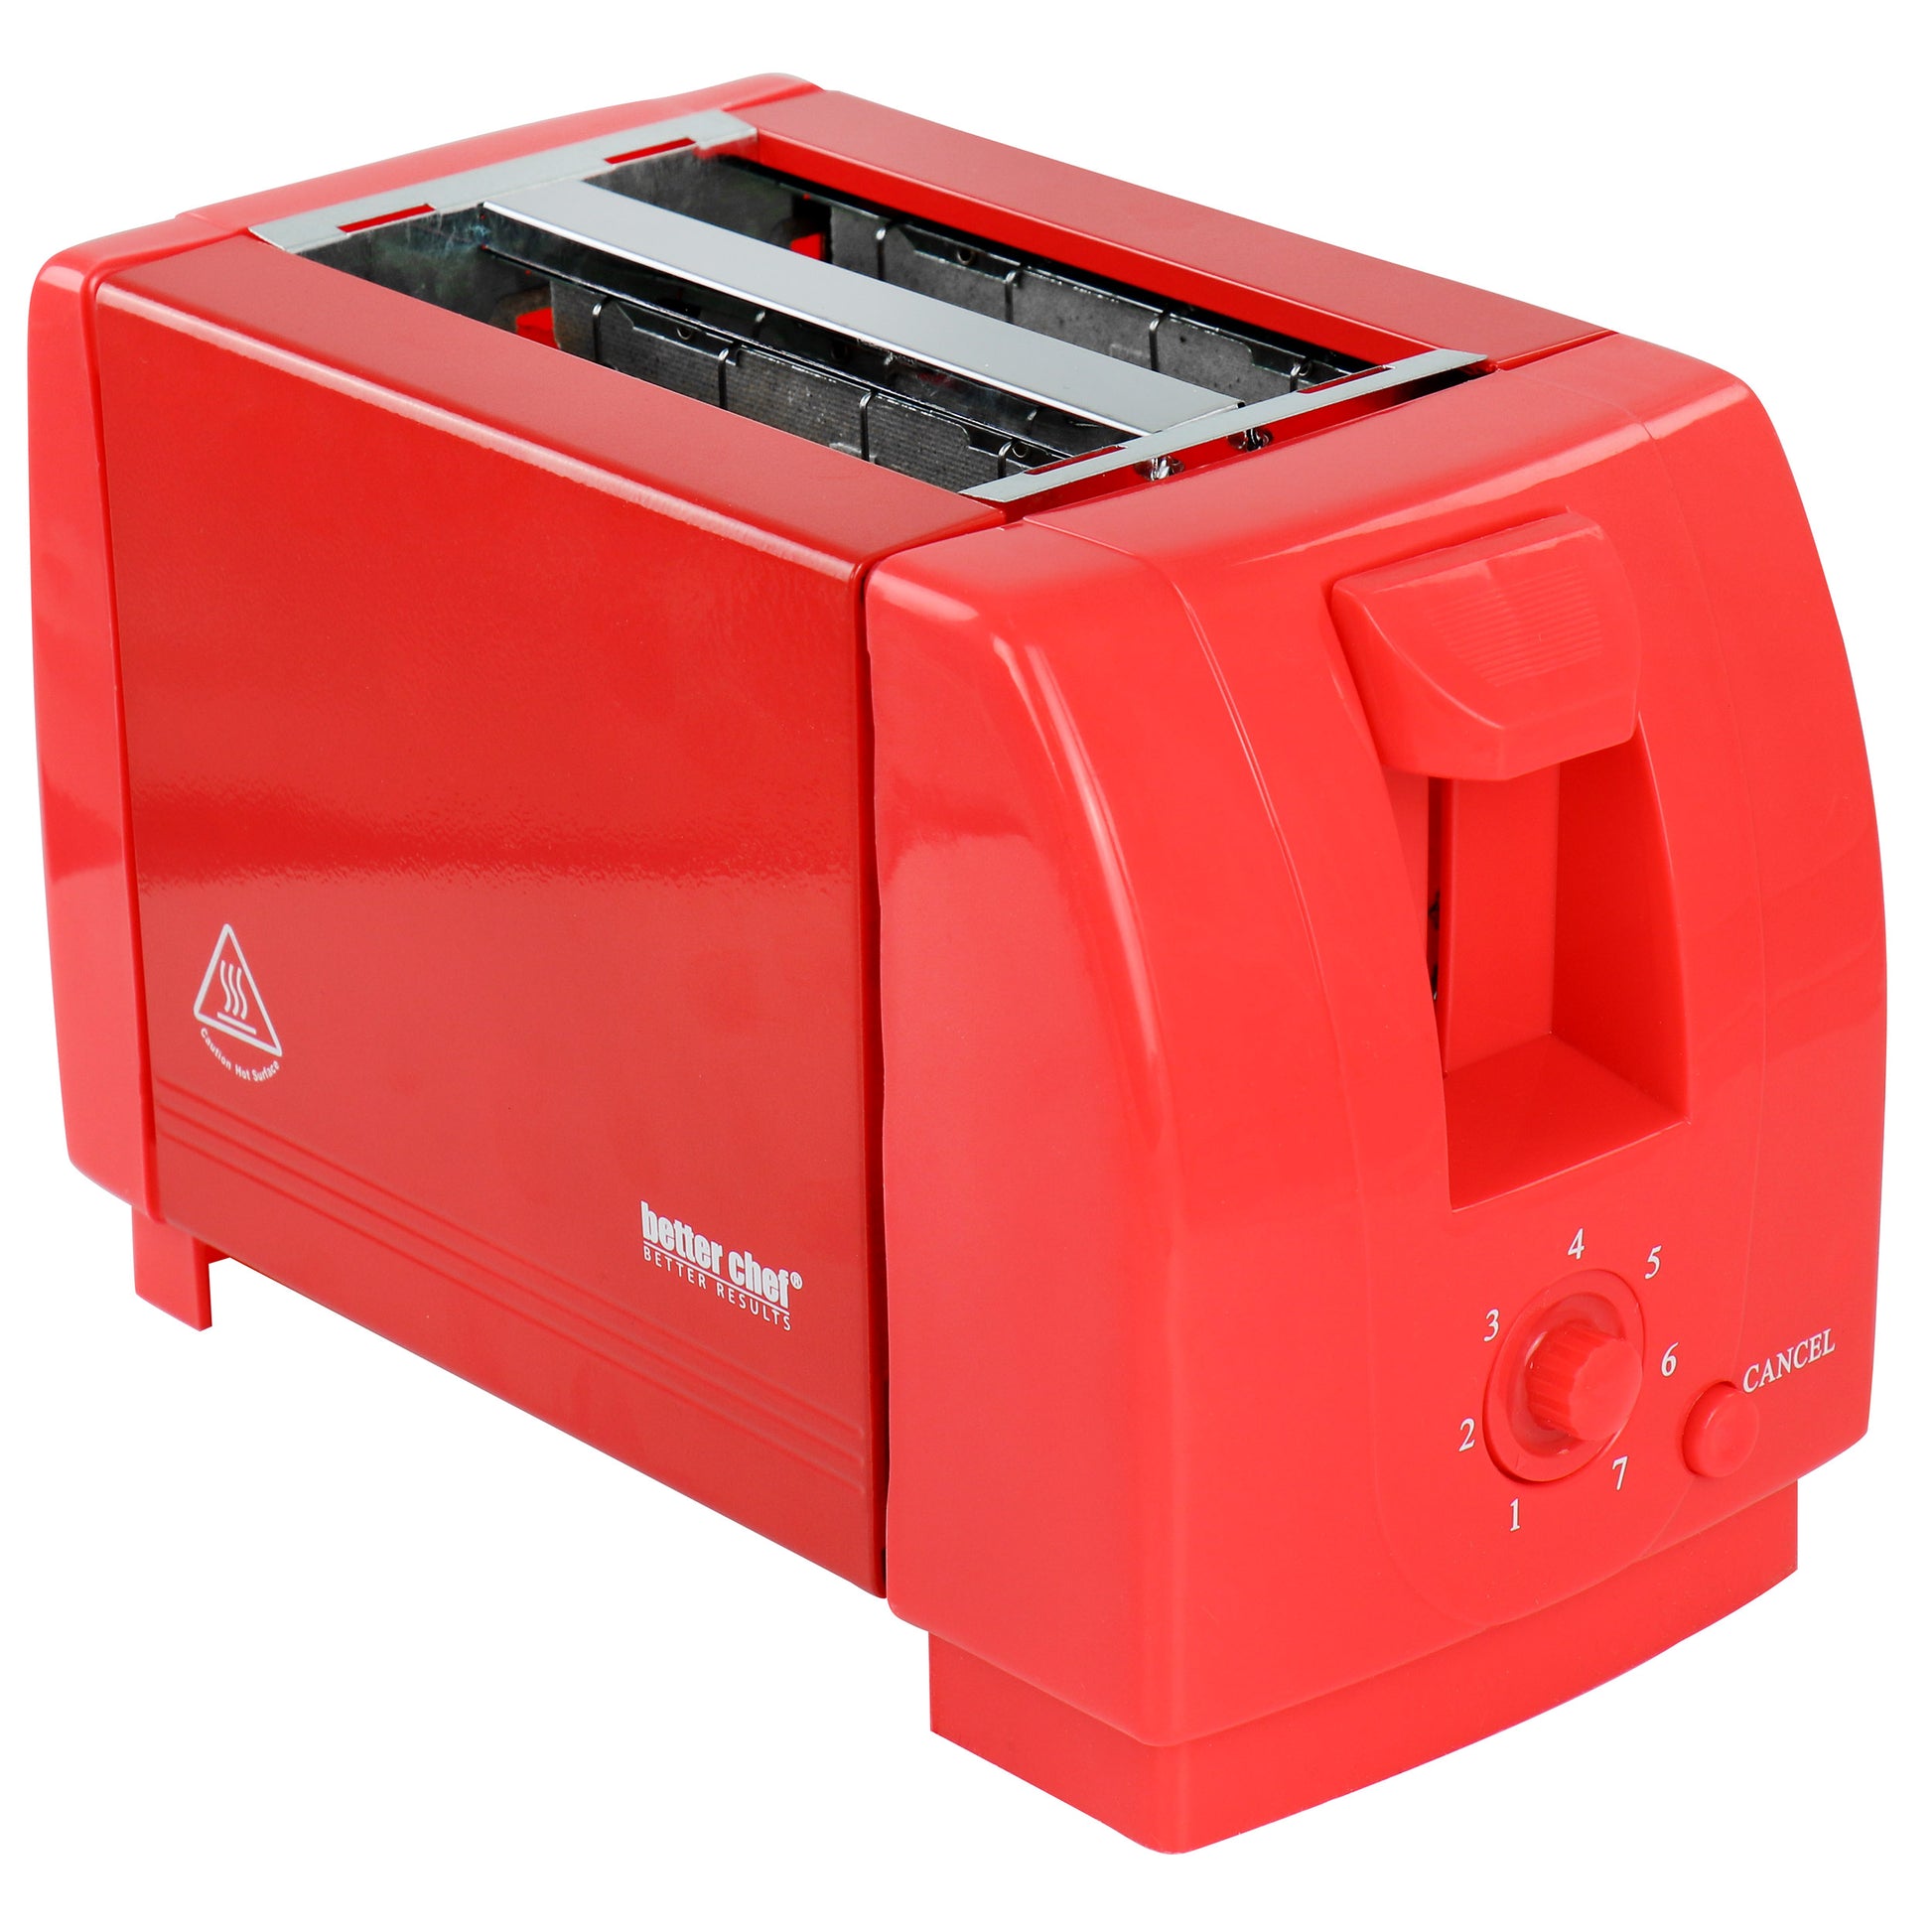 Better Chef Better Chef Compact Two Slice Countertop Toaster in Red